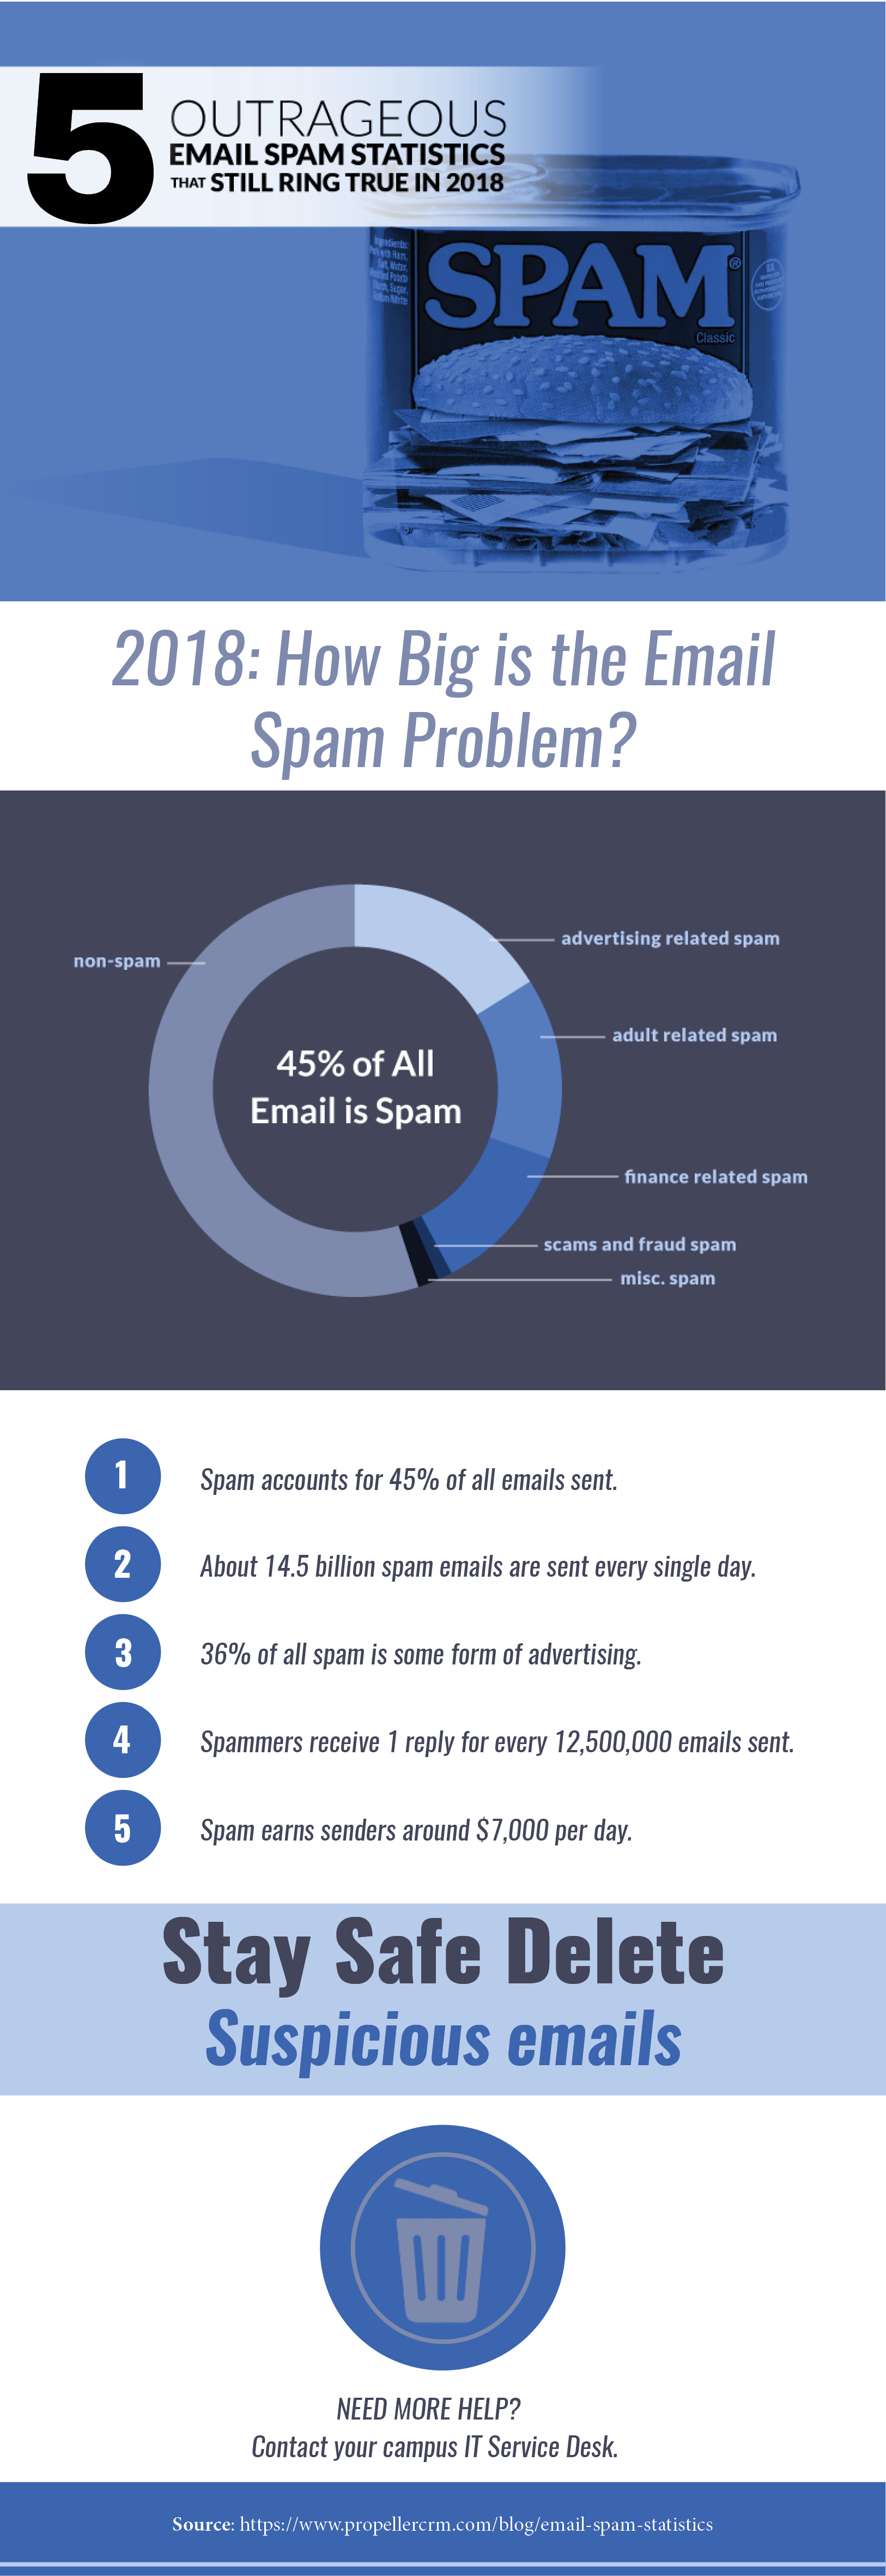 Infographic statistics for spam emails 2018